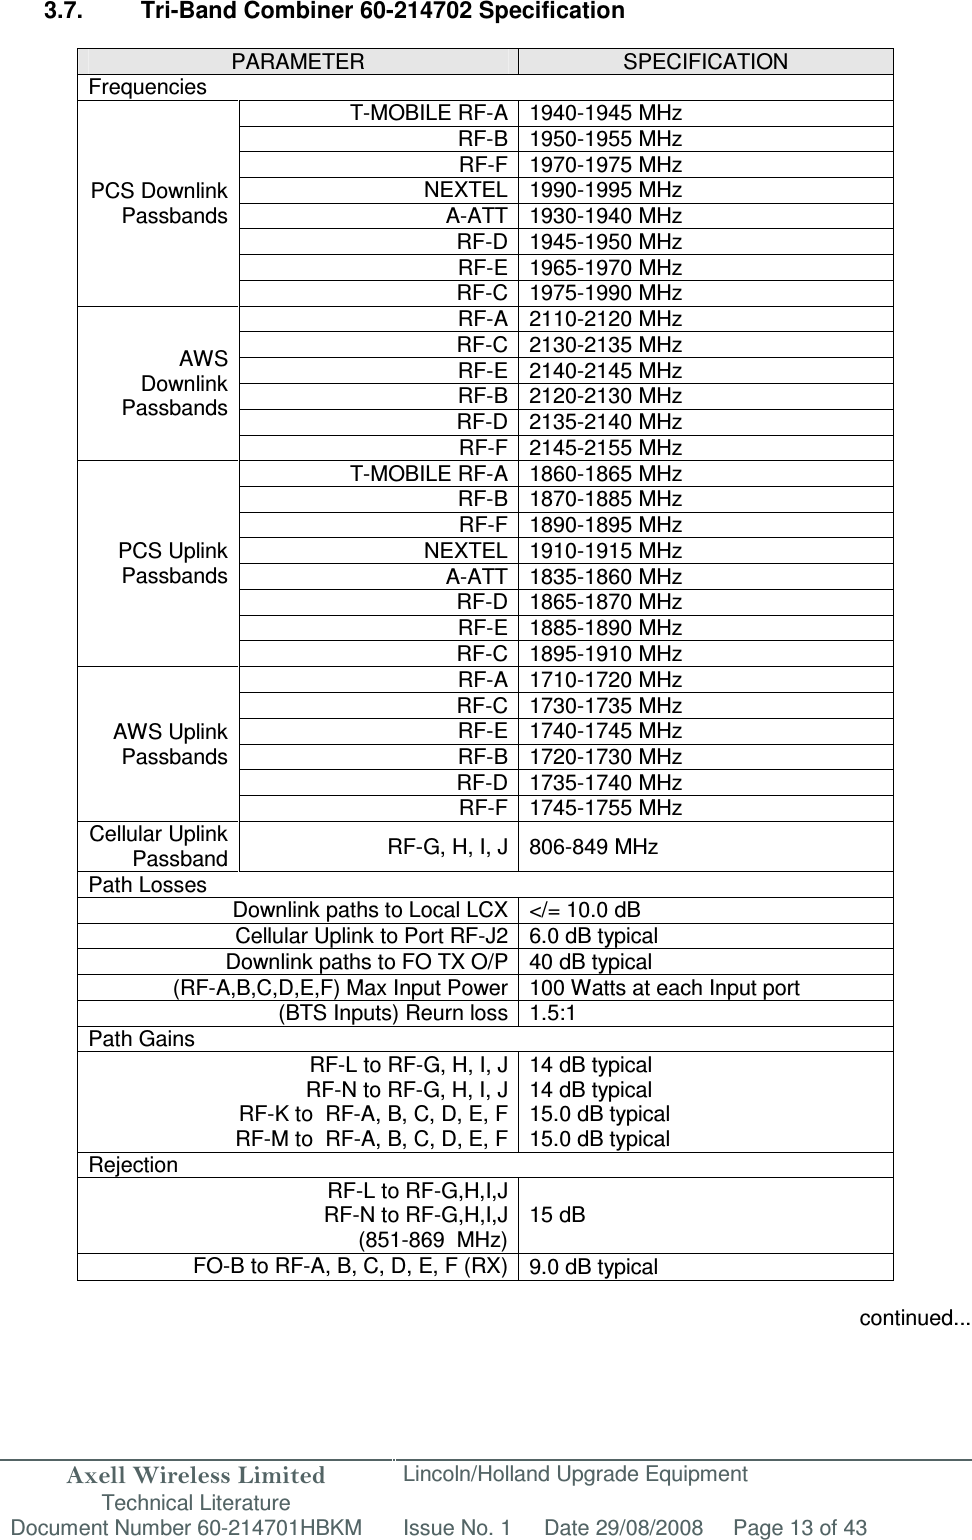 Axell Wireless Limited Technical Literature Lincoln/Holland Upgrade Equipment Document Number 60-214701HBKM Issue No. 1 Date 29/08/2008 Page 13 of 43   3.7.  Tri-Band Combiner 60-214702 Specification  PARAMETER  SPECIFICATION Frequencies PCS Downlink Passbands T-MOBILE RF-A 1940-1945 MHz RF-B 1950-1955 MHz  RF-F 1970-1975 MHz  NEXTEL 1990-1995 MHz A-ATT 1930-1940 MHz RF-D 1945-1950 MHz RF-E 1965-1970 MHz RF-C 1975-1990 MHz AWS Downlink Passbands RF-A 2110-2120 MHz RF-C 2130-2135 MHz RF-E 2140-2145 MHz RF-B 2120-2130 MHz RF-D 2135-2140 MHz RF-F 2145-2155 MHz PCS Uplink Passbands T-MOBILE RF-A 1860-1865 MHz  RF-B 1870-1885 MHz  RF-F 1890-1895 MHz  NEXTEL 1910-1915 MHz A-ATT 1835-1860 MHz RF-D 1865-1870 MHz RF-E 1885-1890 MHz RF-C 1895-1910 MHz AWS Uplink Passbands RF-A 1710-1720 MHz RF-C 1730-1735 MHz RF-E 1740-1745 MHz RF-B 1720-1730 MHz RF-D 1735-1740 MHz RF-F 1745-1755 MHz Cellular Uplink Passband RF-G, H, I, J 806-849 MHz Path Losses Downlink paths to Local LCX &lt;/= 10.0 dB  Cellular Uplink to Port RF-J2 6.0 dB typical Downlink paths to FO TX O/P 40 dB typical (RF-A,B,C,D,E,F) Max Input Power 100 Watts at each Input port (BTS Inputs) Reurn loss 1.5:1 Path Gains RF-L to RF-G, H, I, J RF-N to RF-G, H, I, J RF-K to  RF-A, B, C, D, E, F RF-M to  RF-A, B, C, D, E, F 14 dB typical 14 dB typical 15.0 dB typical 15.0 dB typical Rejection RF-L to RF-G,H,I,J RF-N to RF-G,H,I,J (851-869  MHz) 15 dB FO-B to RF-A, B, C, D, E, F (RX) 9.0 dB typical  continued...  